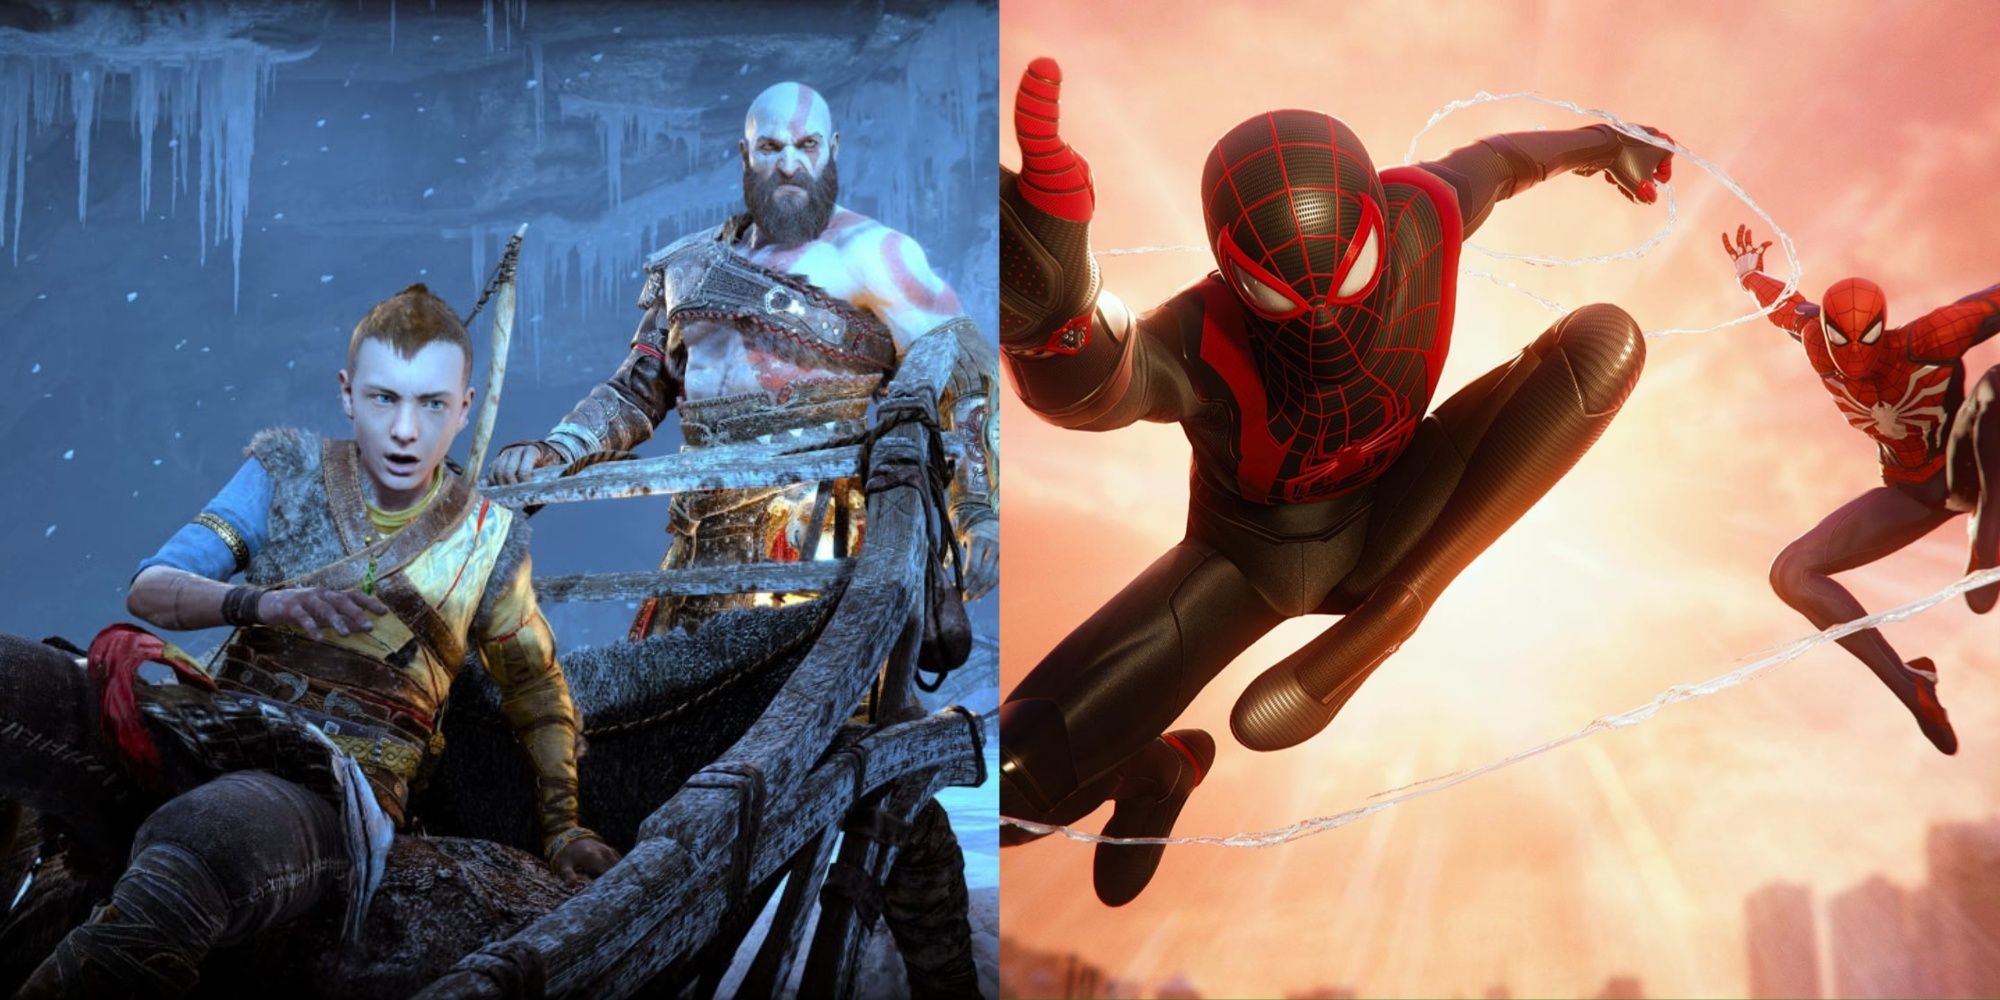 kratos pulling atreus on a sled in god of war ragnarok, and miles and peter swininging in spider-man